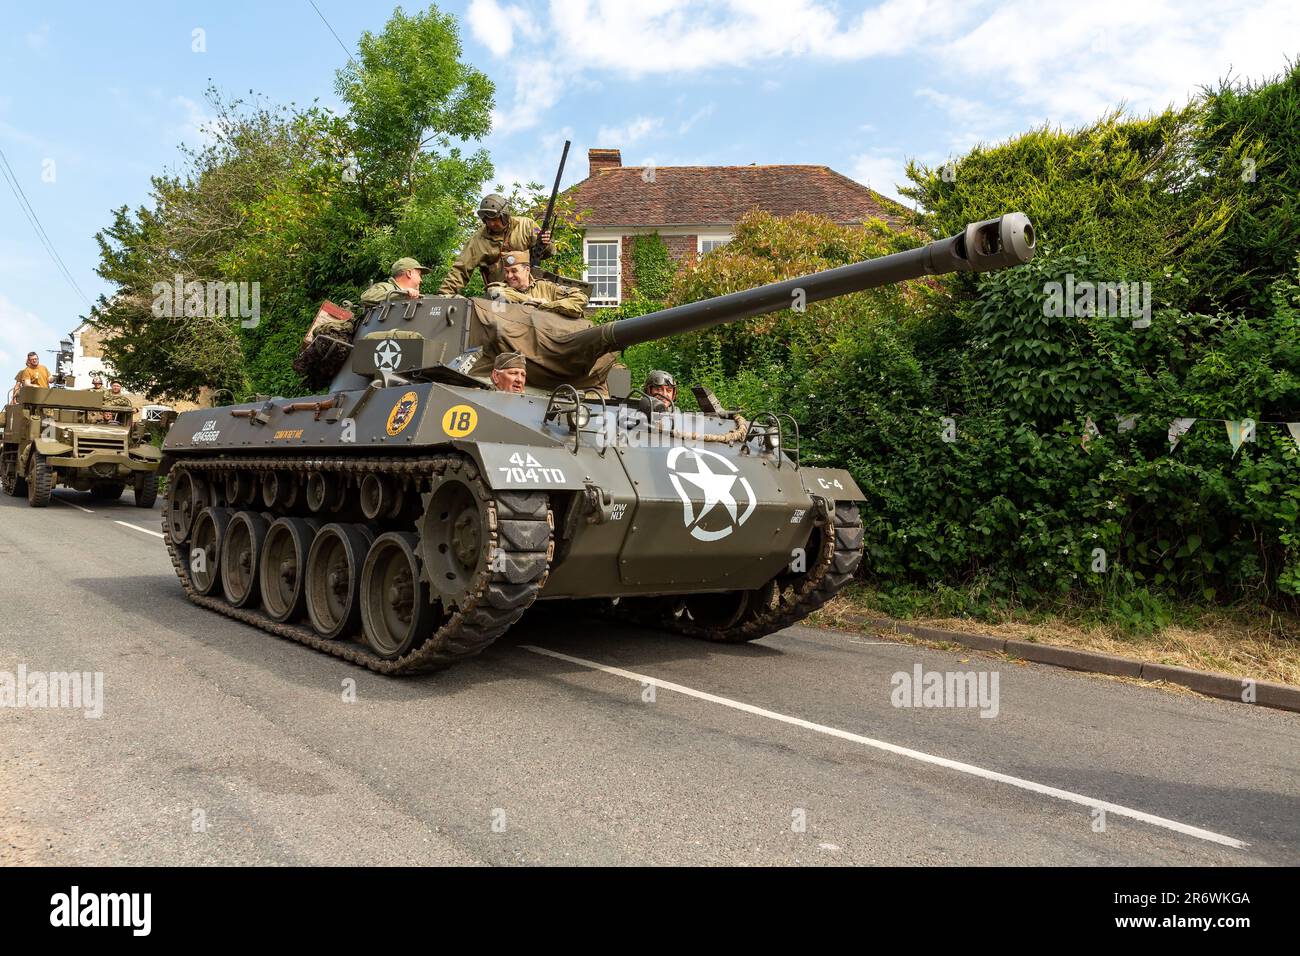 American T18 Hellcat Tank at the Southwick revival a D Day event in Southwick Hampshire. Manned vehicle travelling along a country lane. Stock Photo